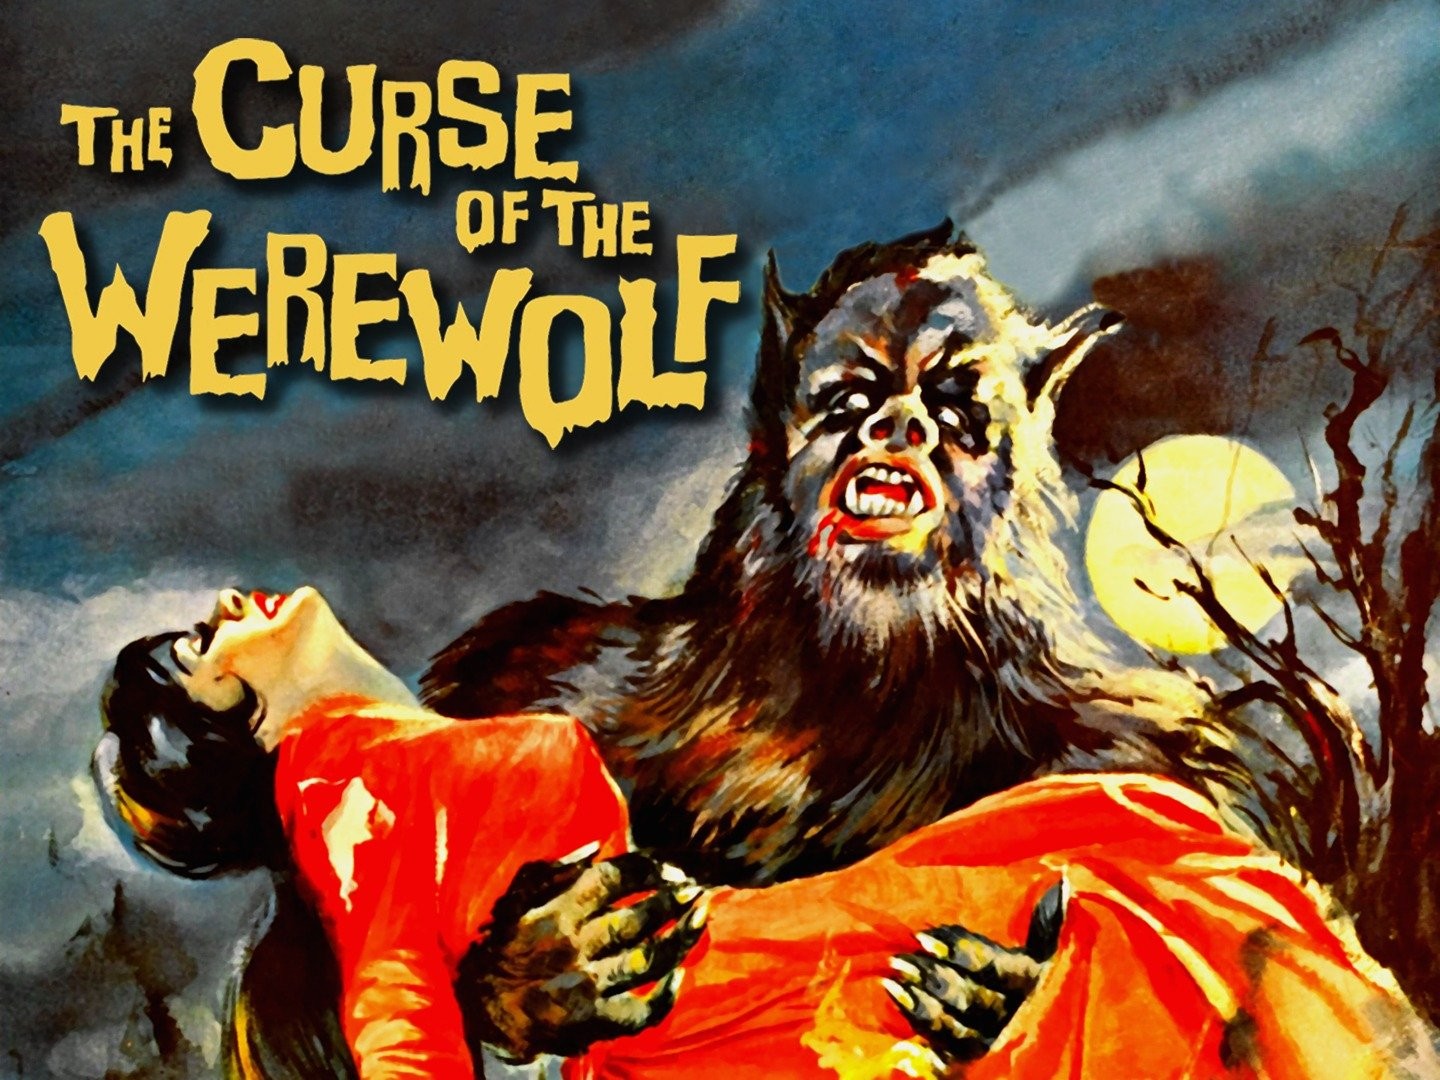 How to watch and stream The Curse of the Werewolf - 1961 on Roku